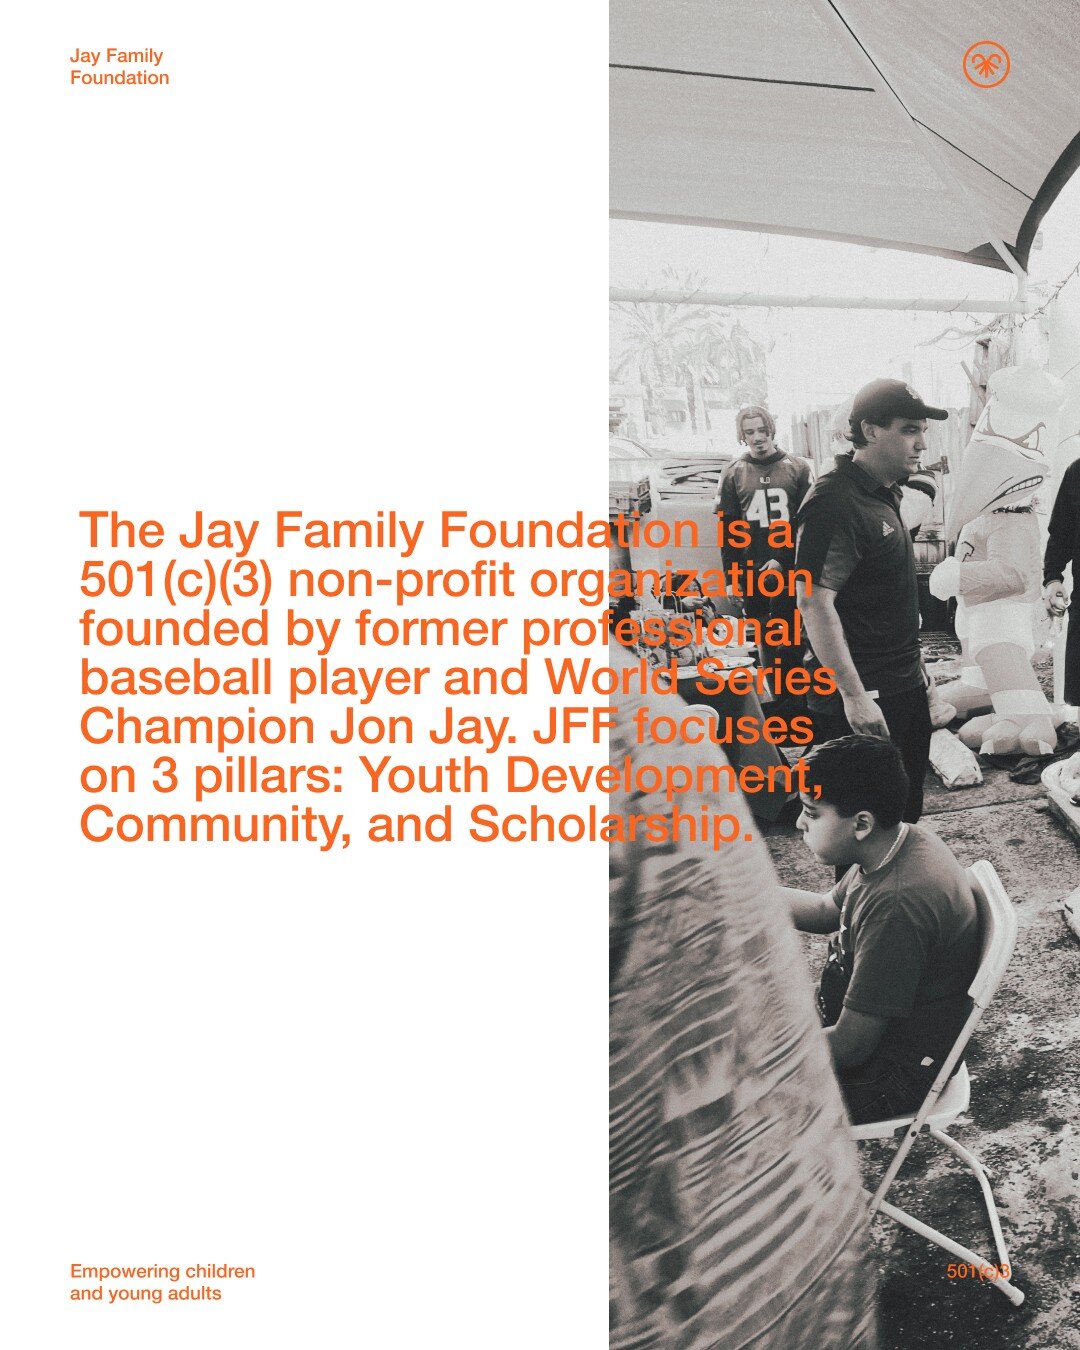 The Jay Family Foundation is a 501(c)(3) non-profit organization founded by former professional baseball player and World Series Champion Jon Jay. JFF focuses on 3 pillars: Youth Development, Community, and Scholarship.

See more at jayfamilyfoundati